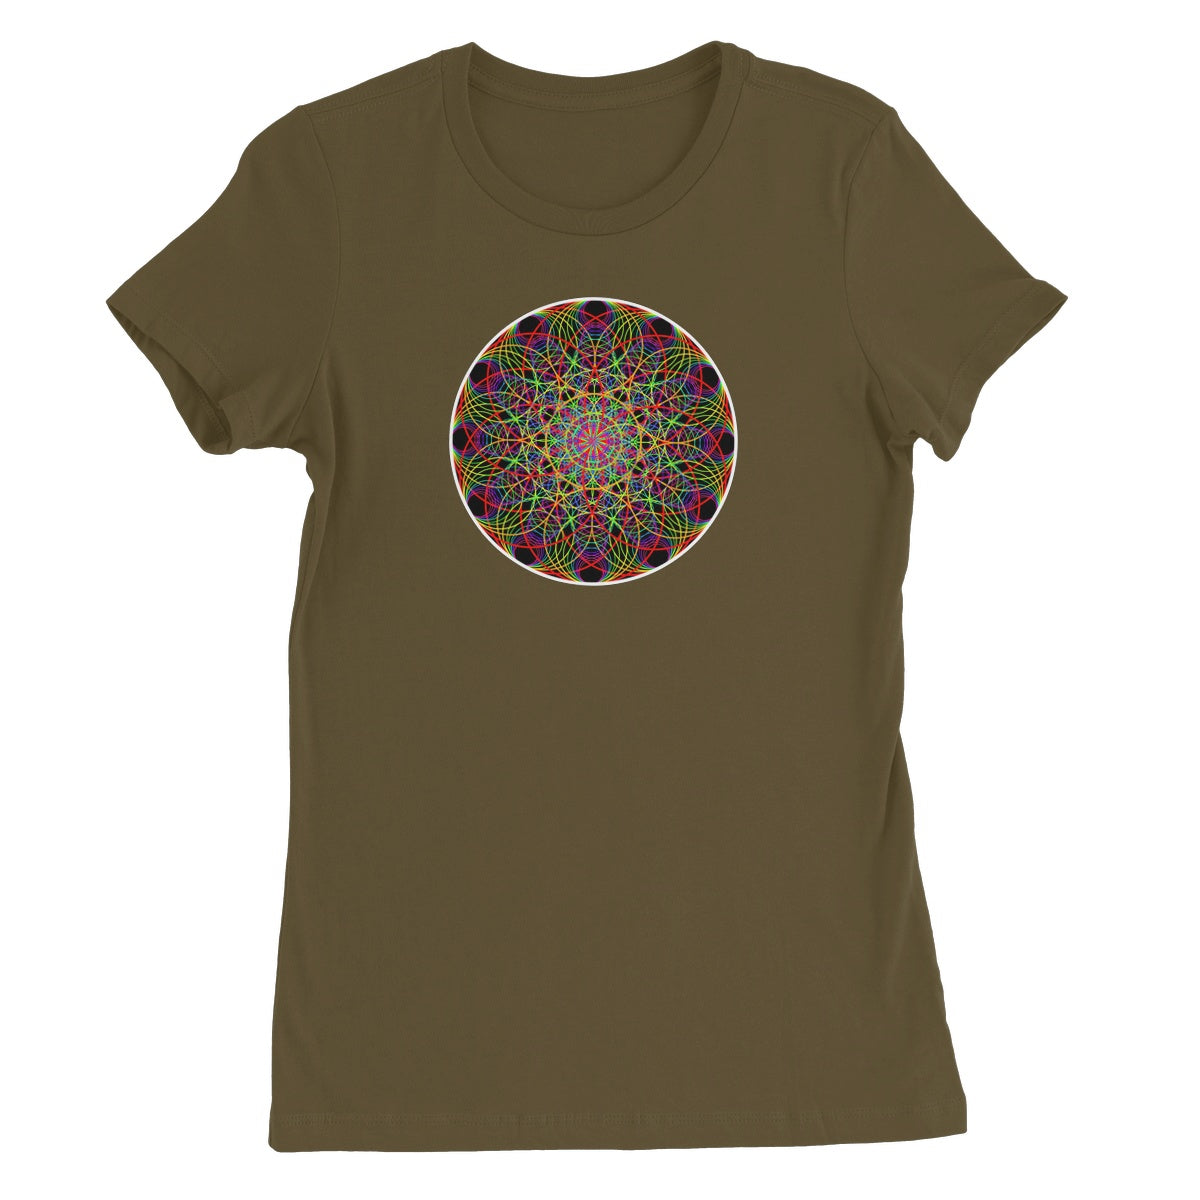 Twelve Sound Waves in a Circle Women's Favourite T-Shirt